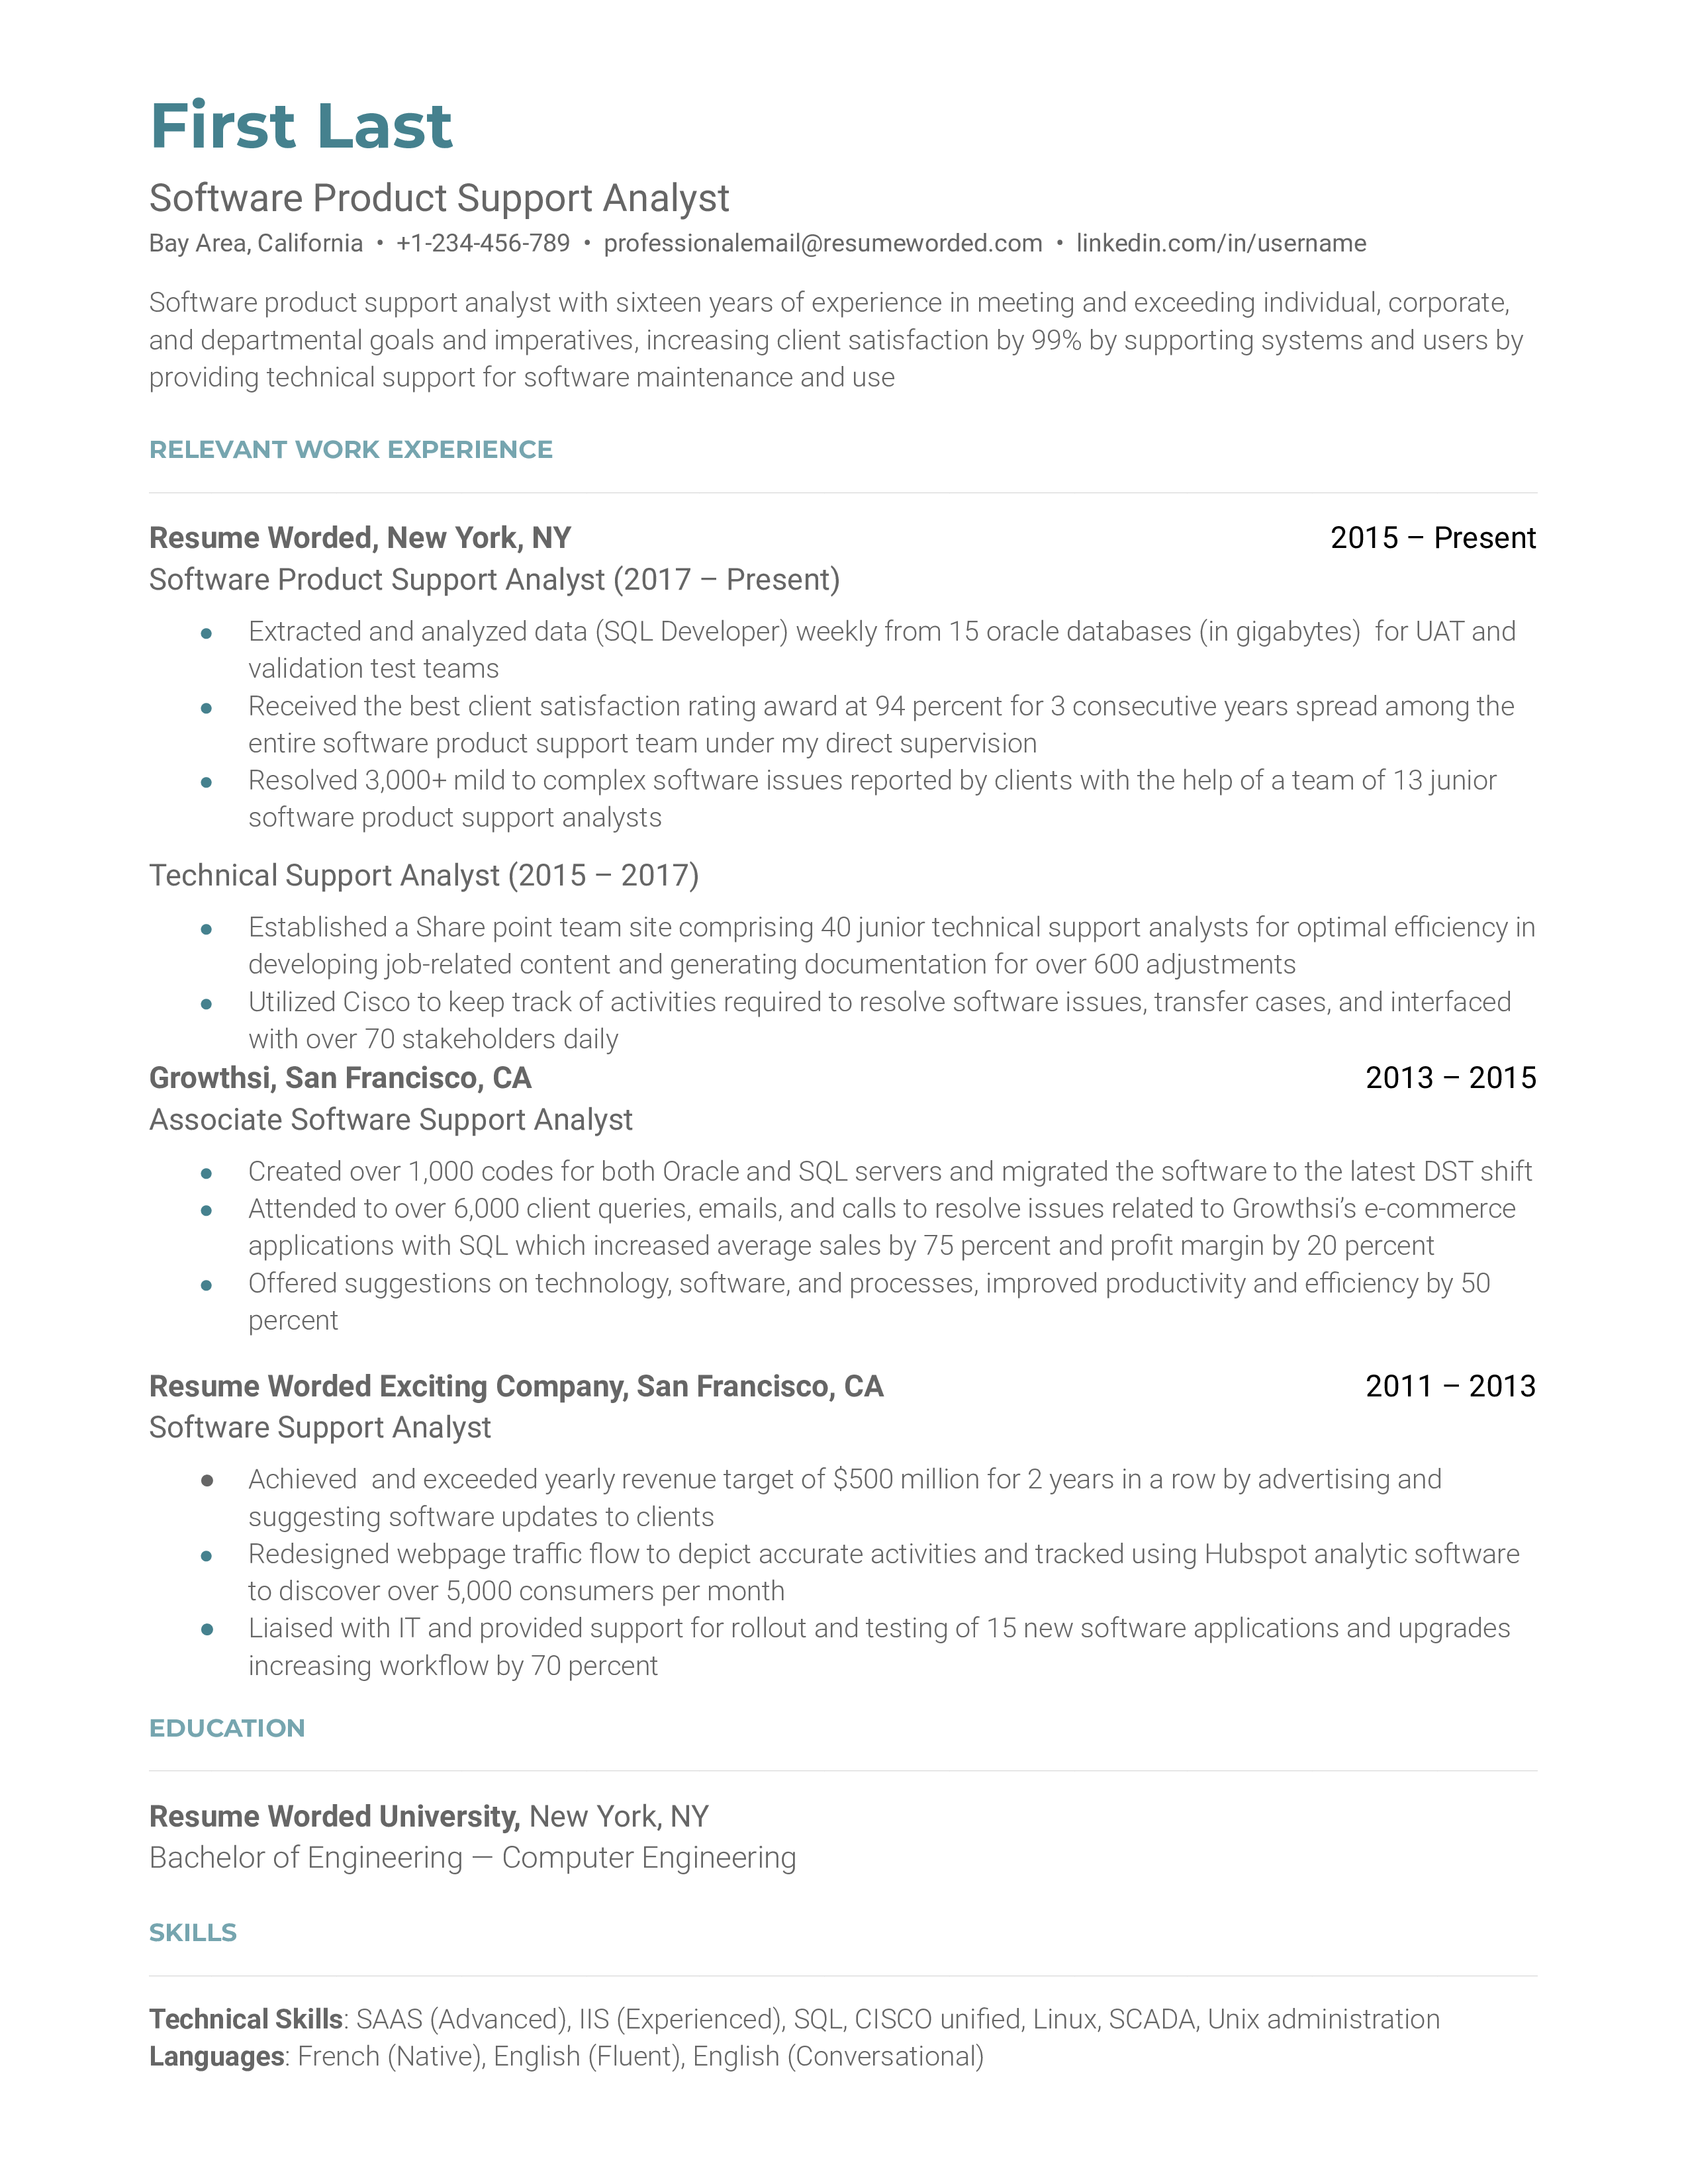 Software Product Support Analyst Resume Sample